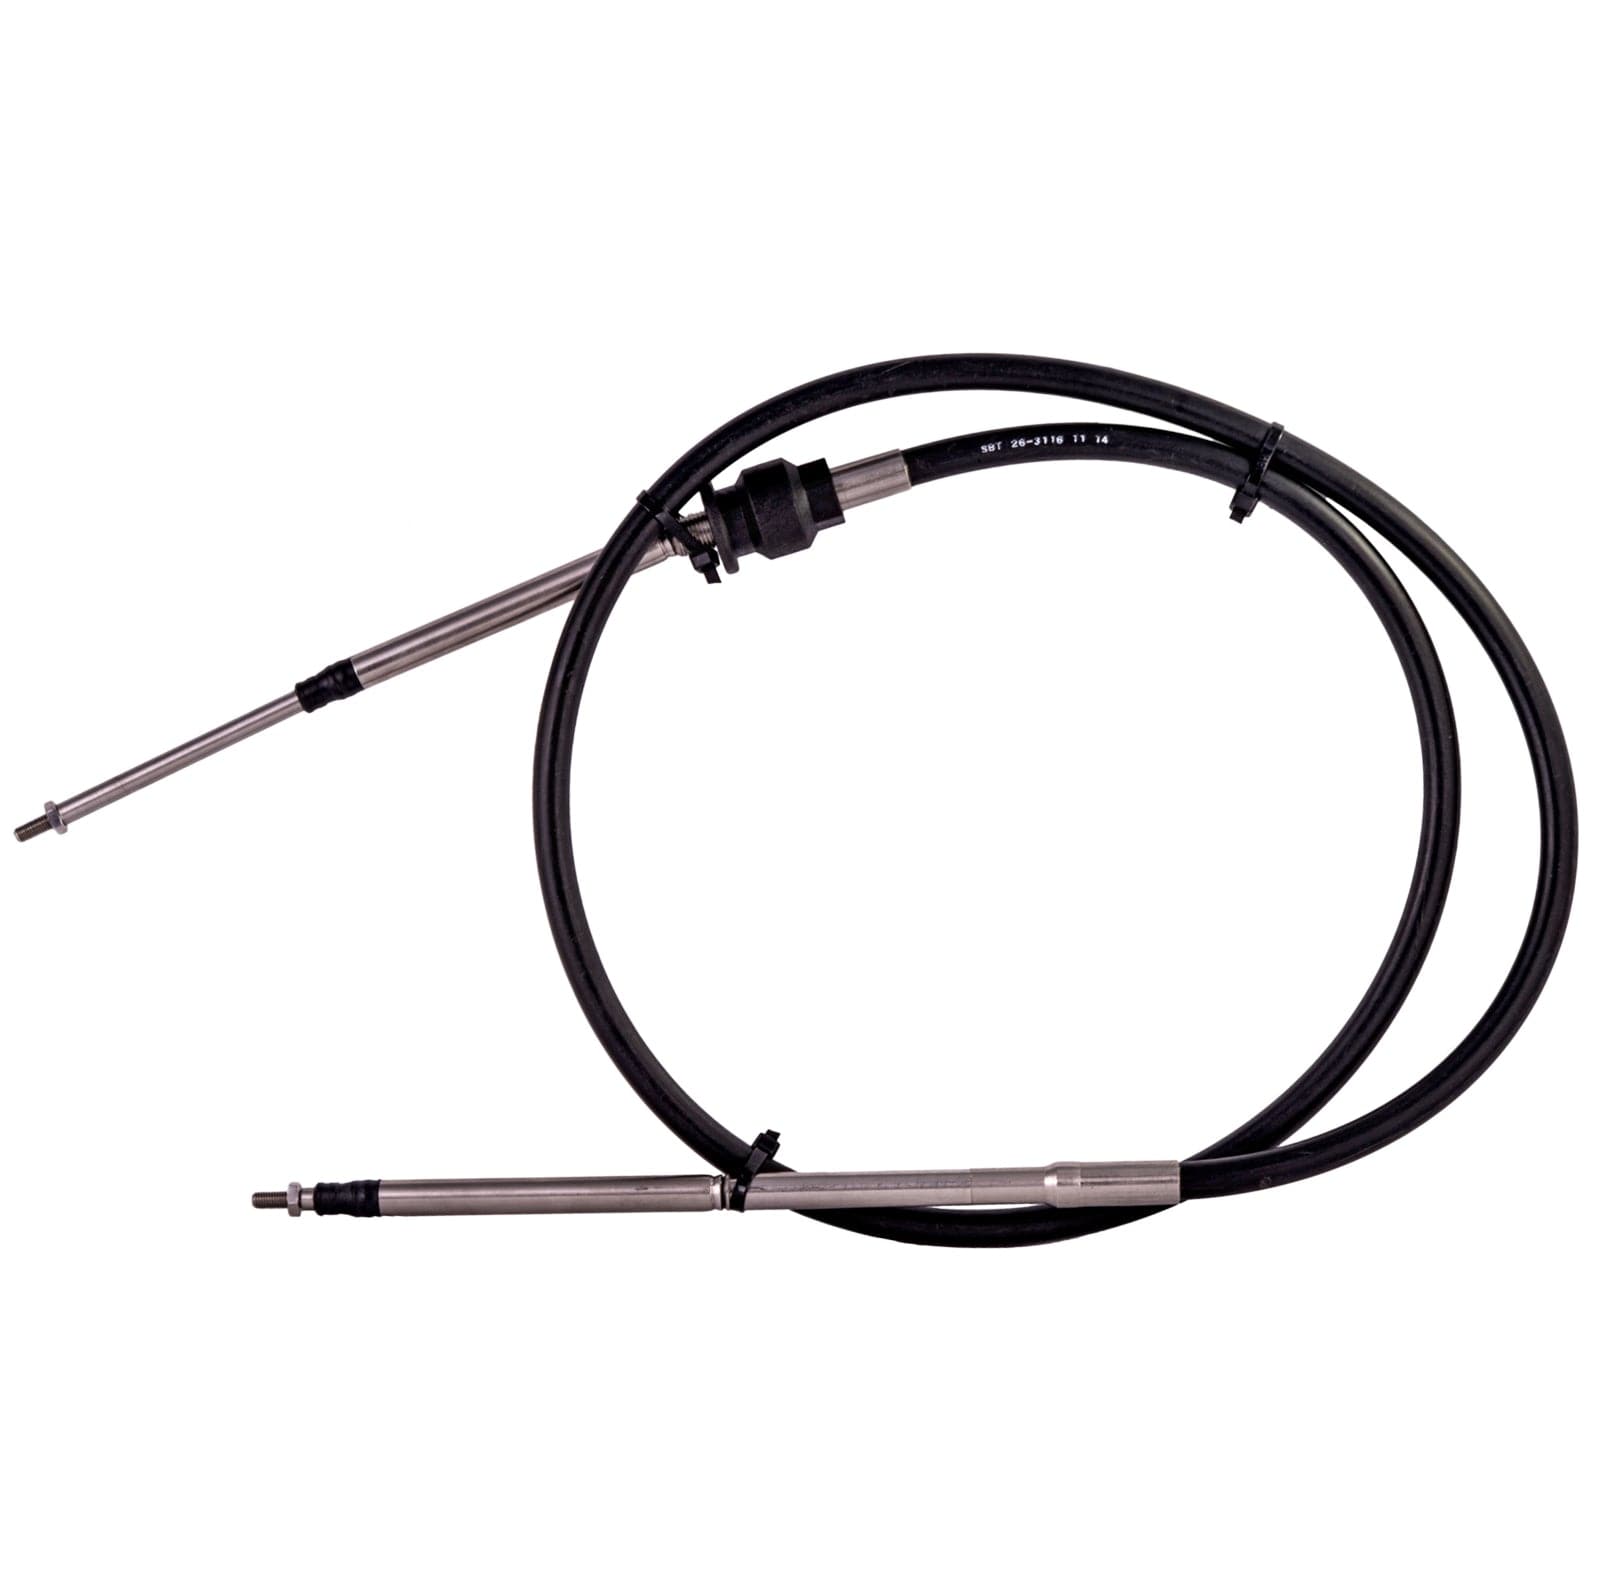 SBT Steering Cable for Sea-Doo GSX RFI/RX/RX DI 277000841 2000 2001 2002 2003